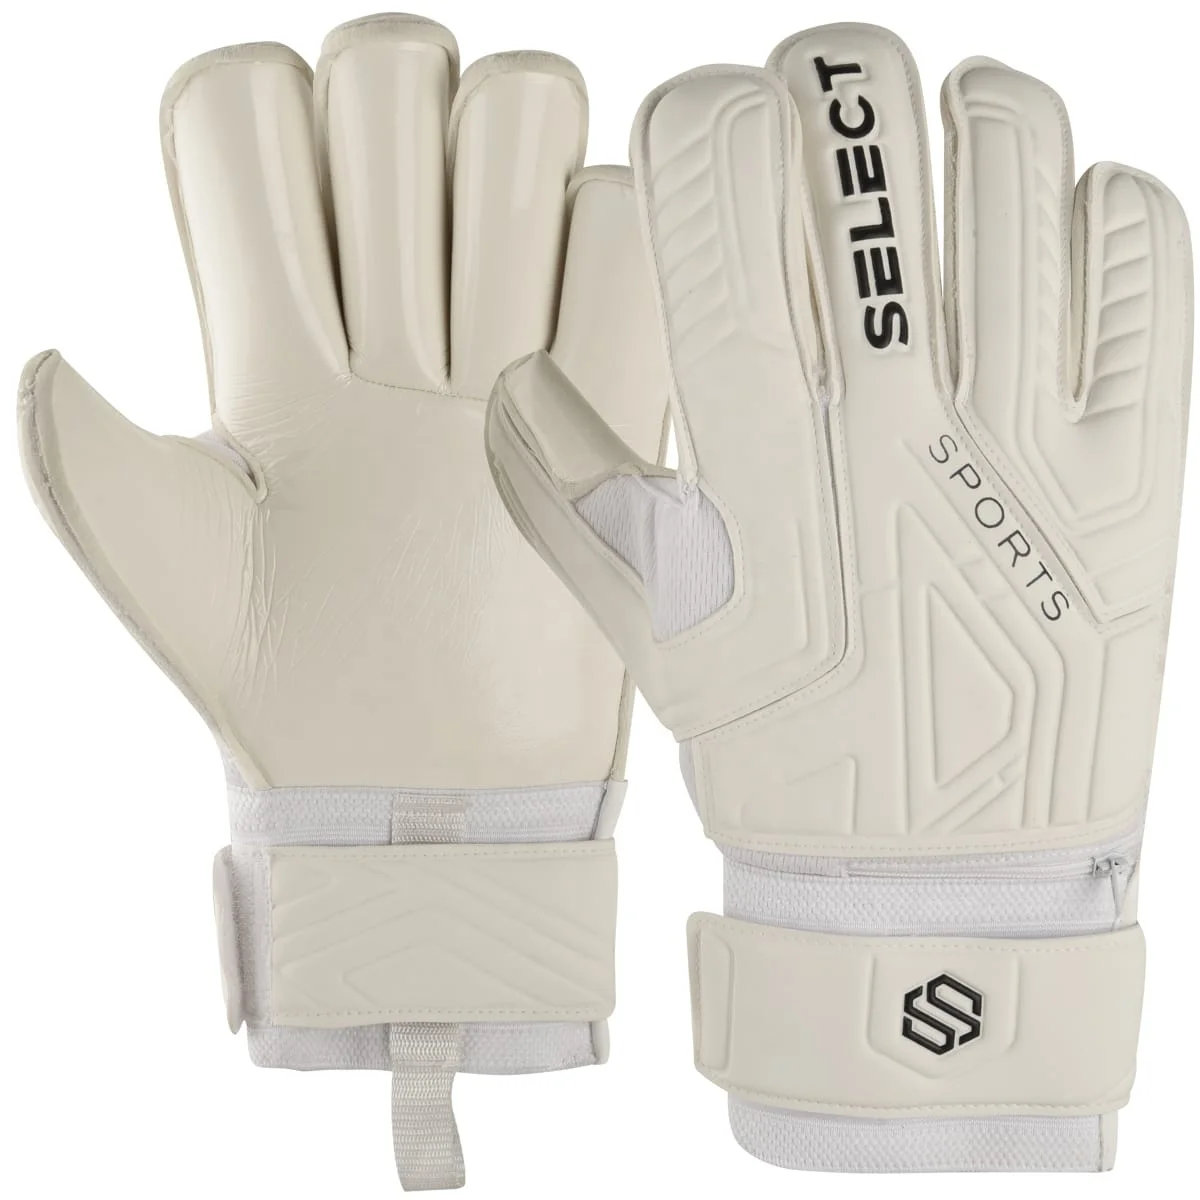 TOP QUALITY PROFESSIONAL GOALIE GLOVES GERMAN LATEX 4MM CUSTOMIZED GOALKEEPER GLOVES FINGER PROTECTION (10000004478460)